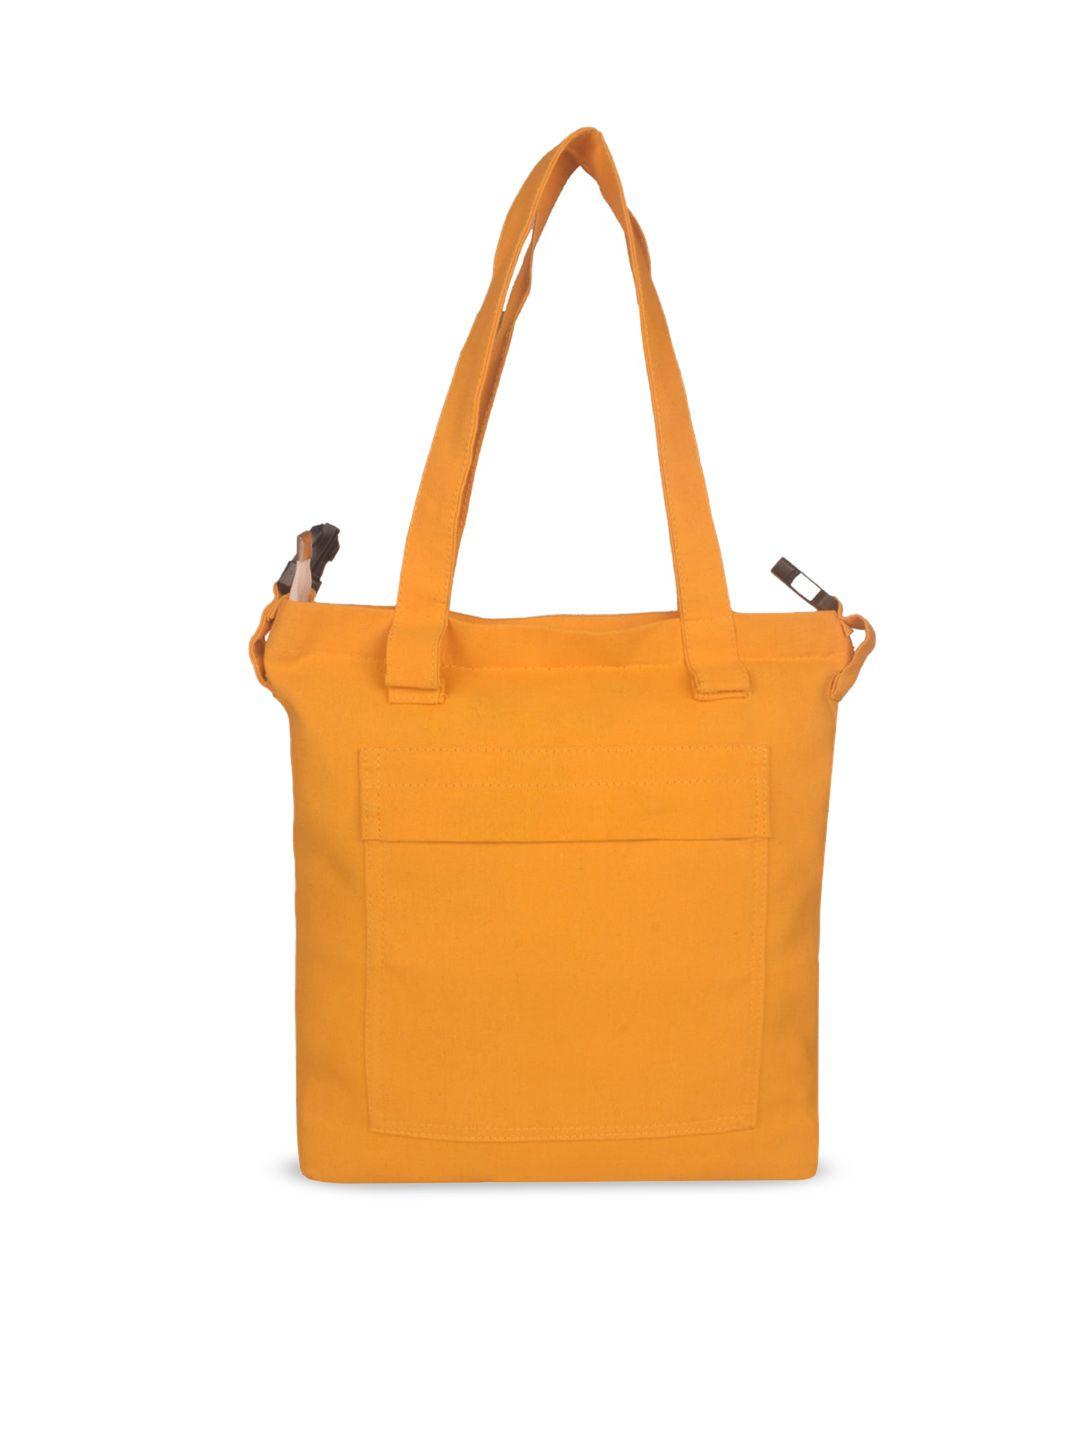 bagkok yellow structured handheld bag with fringed